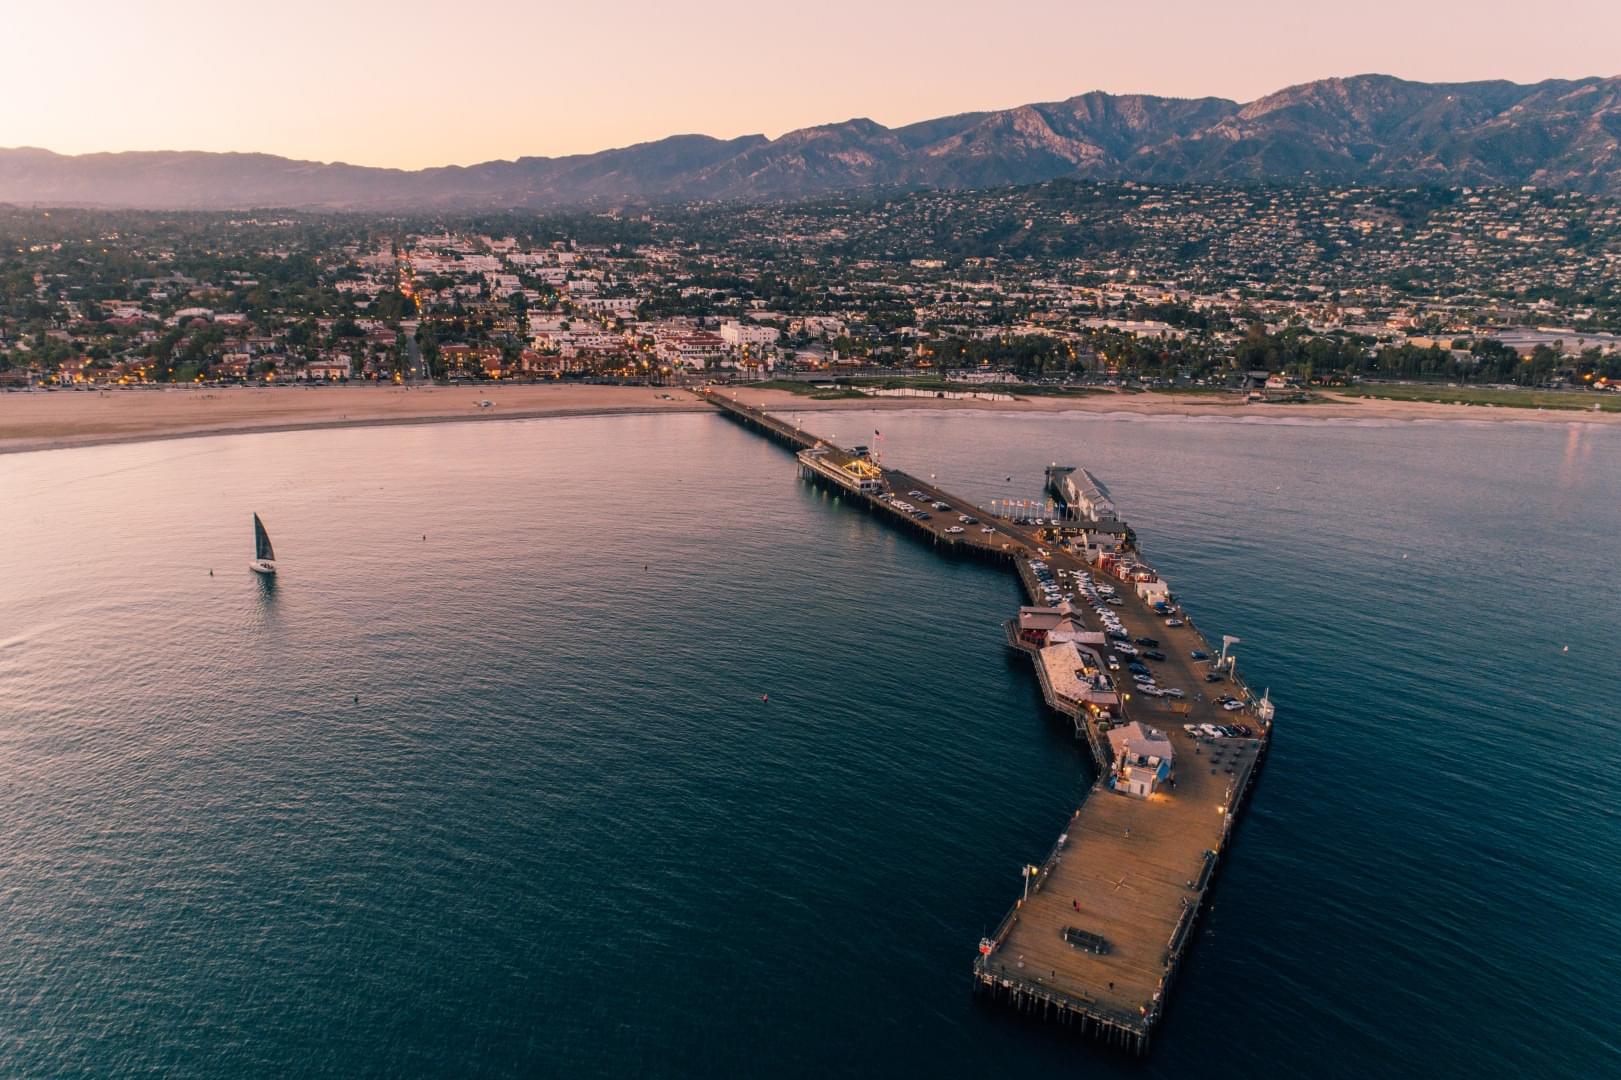 Stearns Wharf Overview